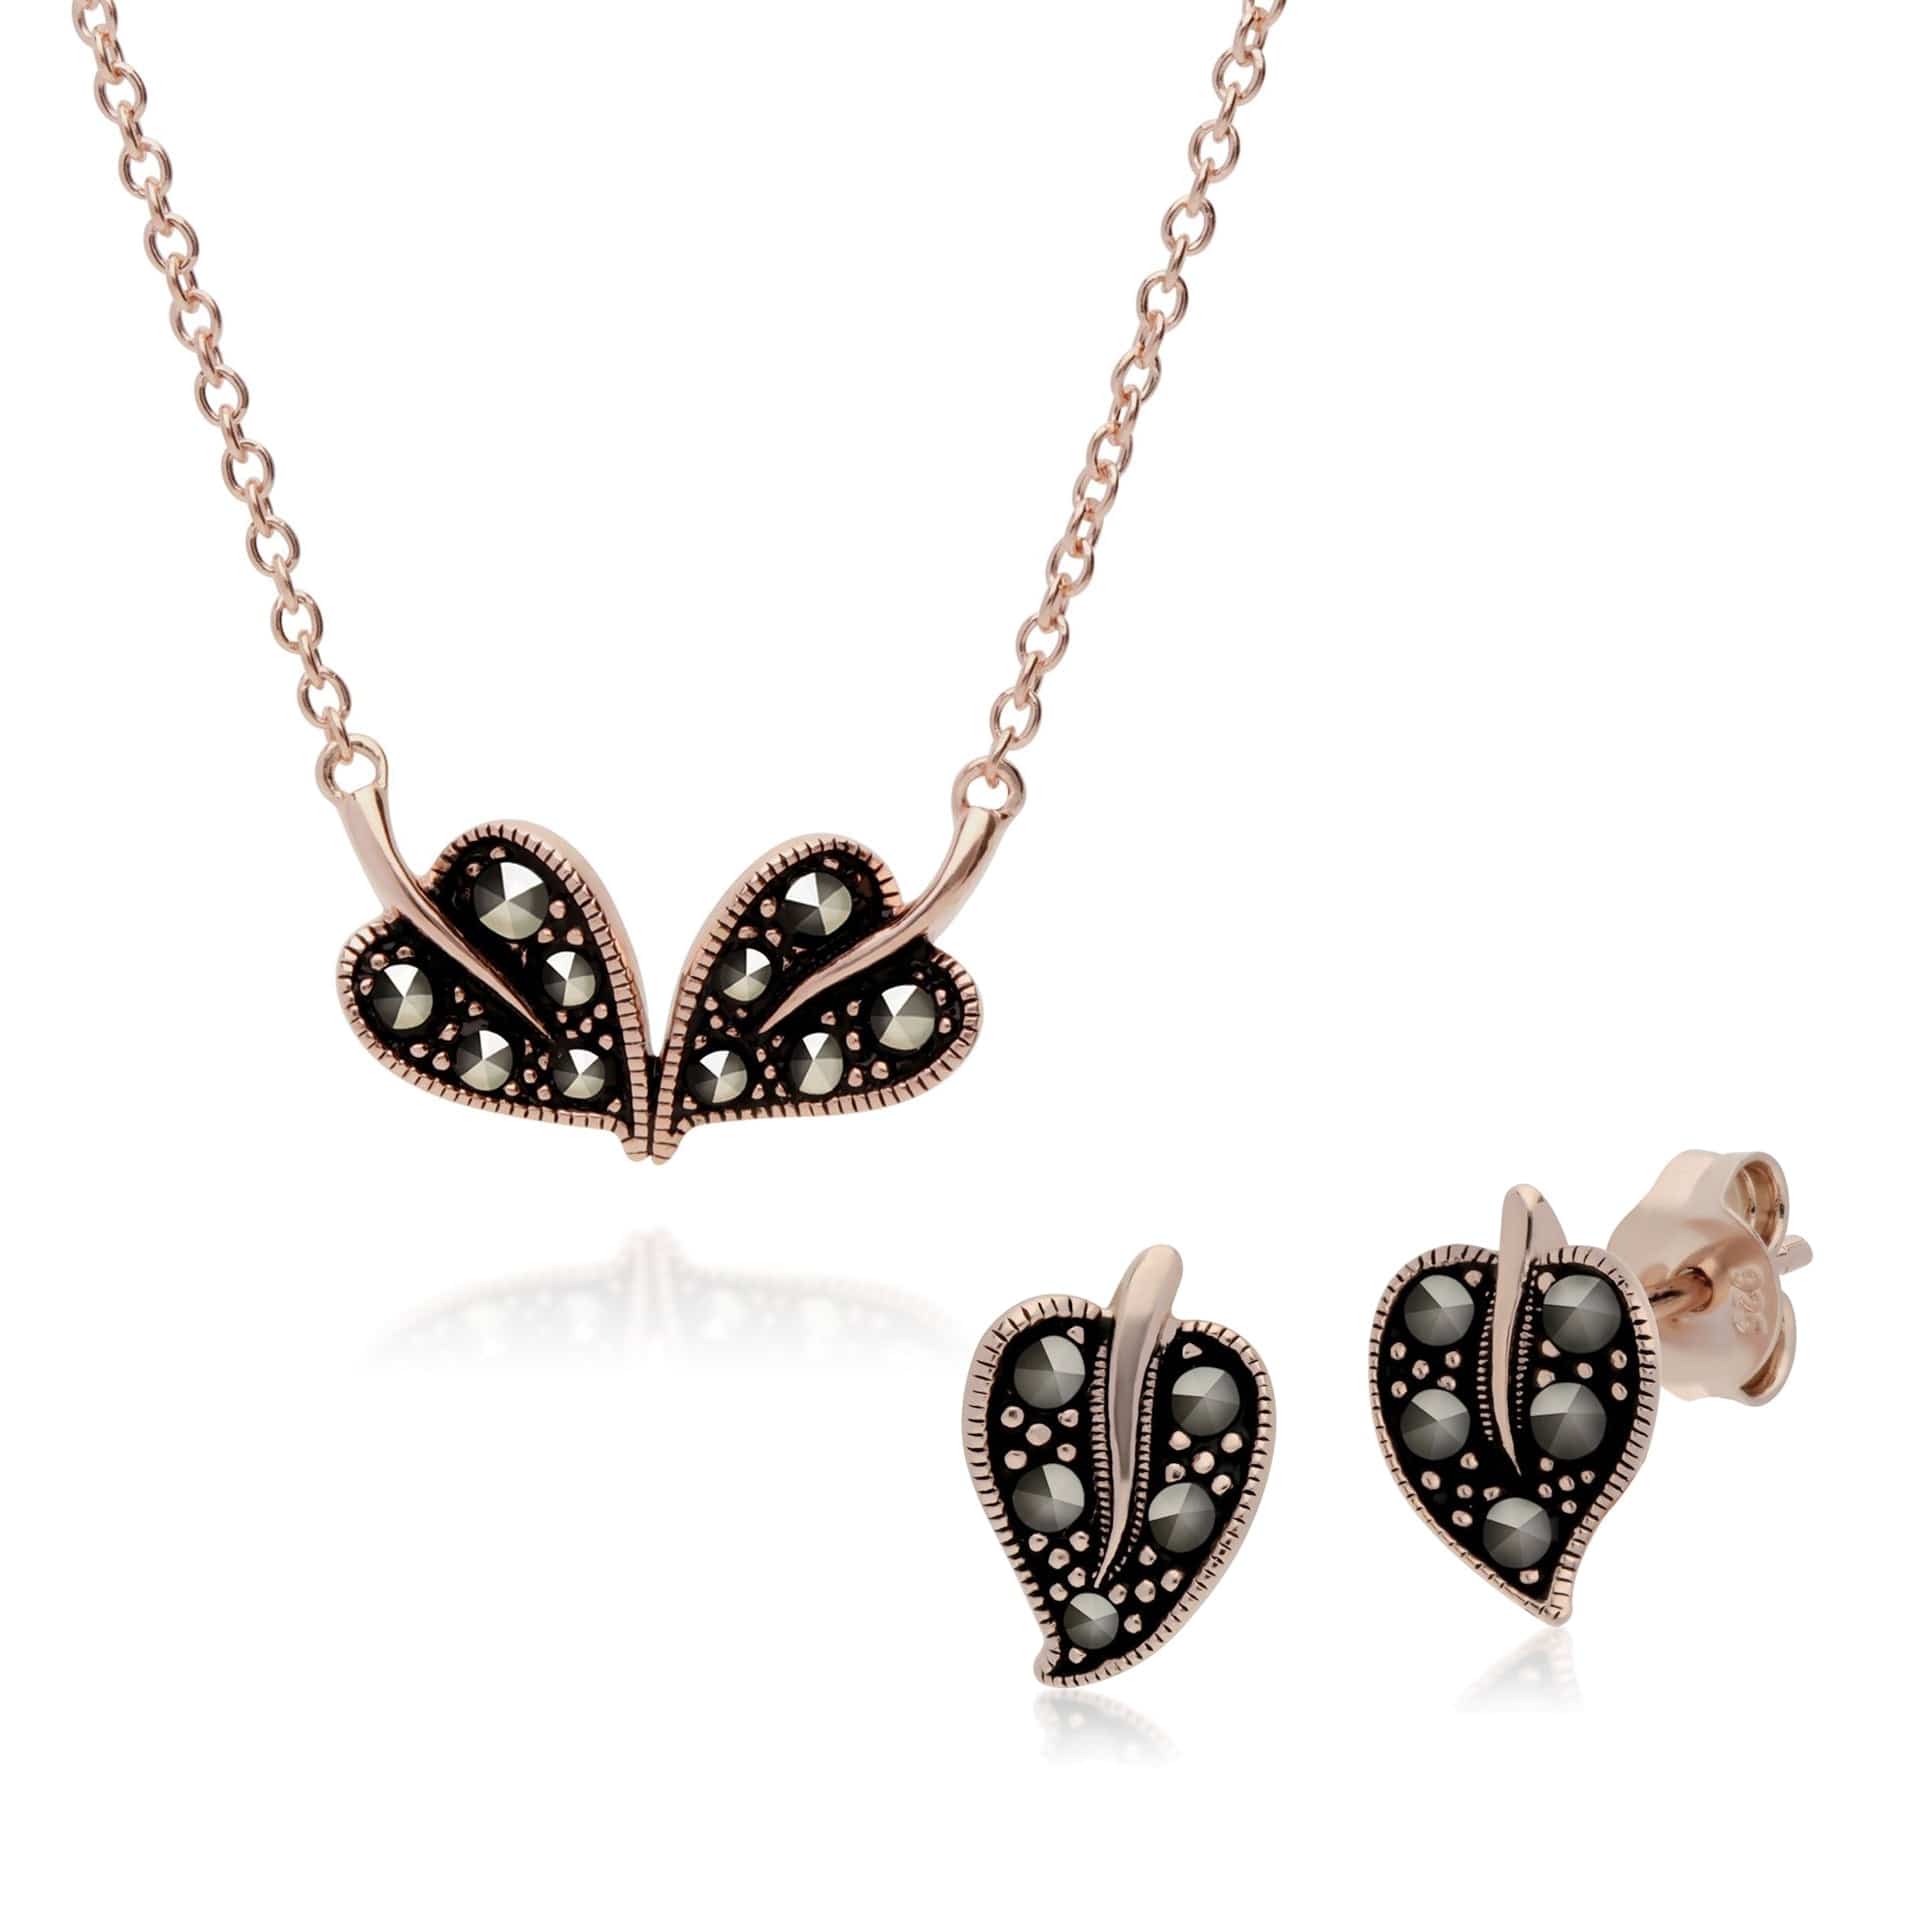 224E023401925-224N017201925 Rose Gold Plated Marcasite Leaf Stud Earrings & Necklace Set in 925 Sterling Silver 1